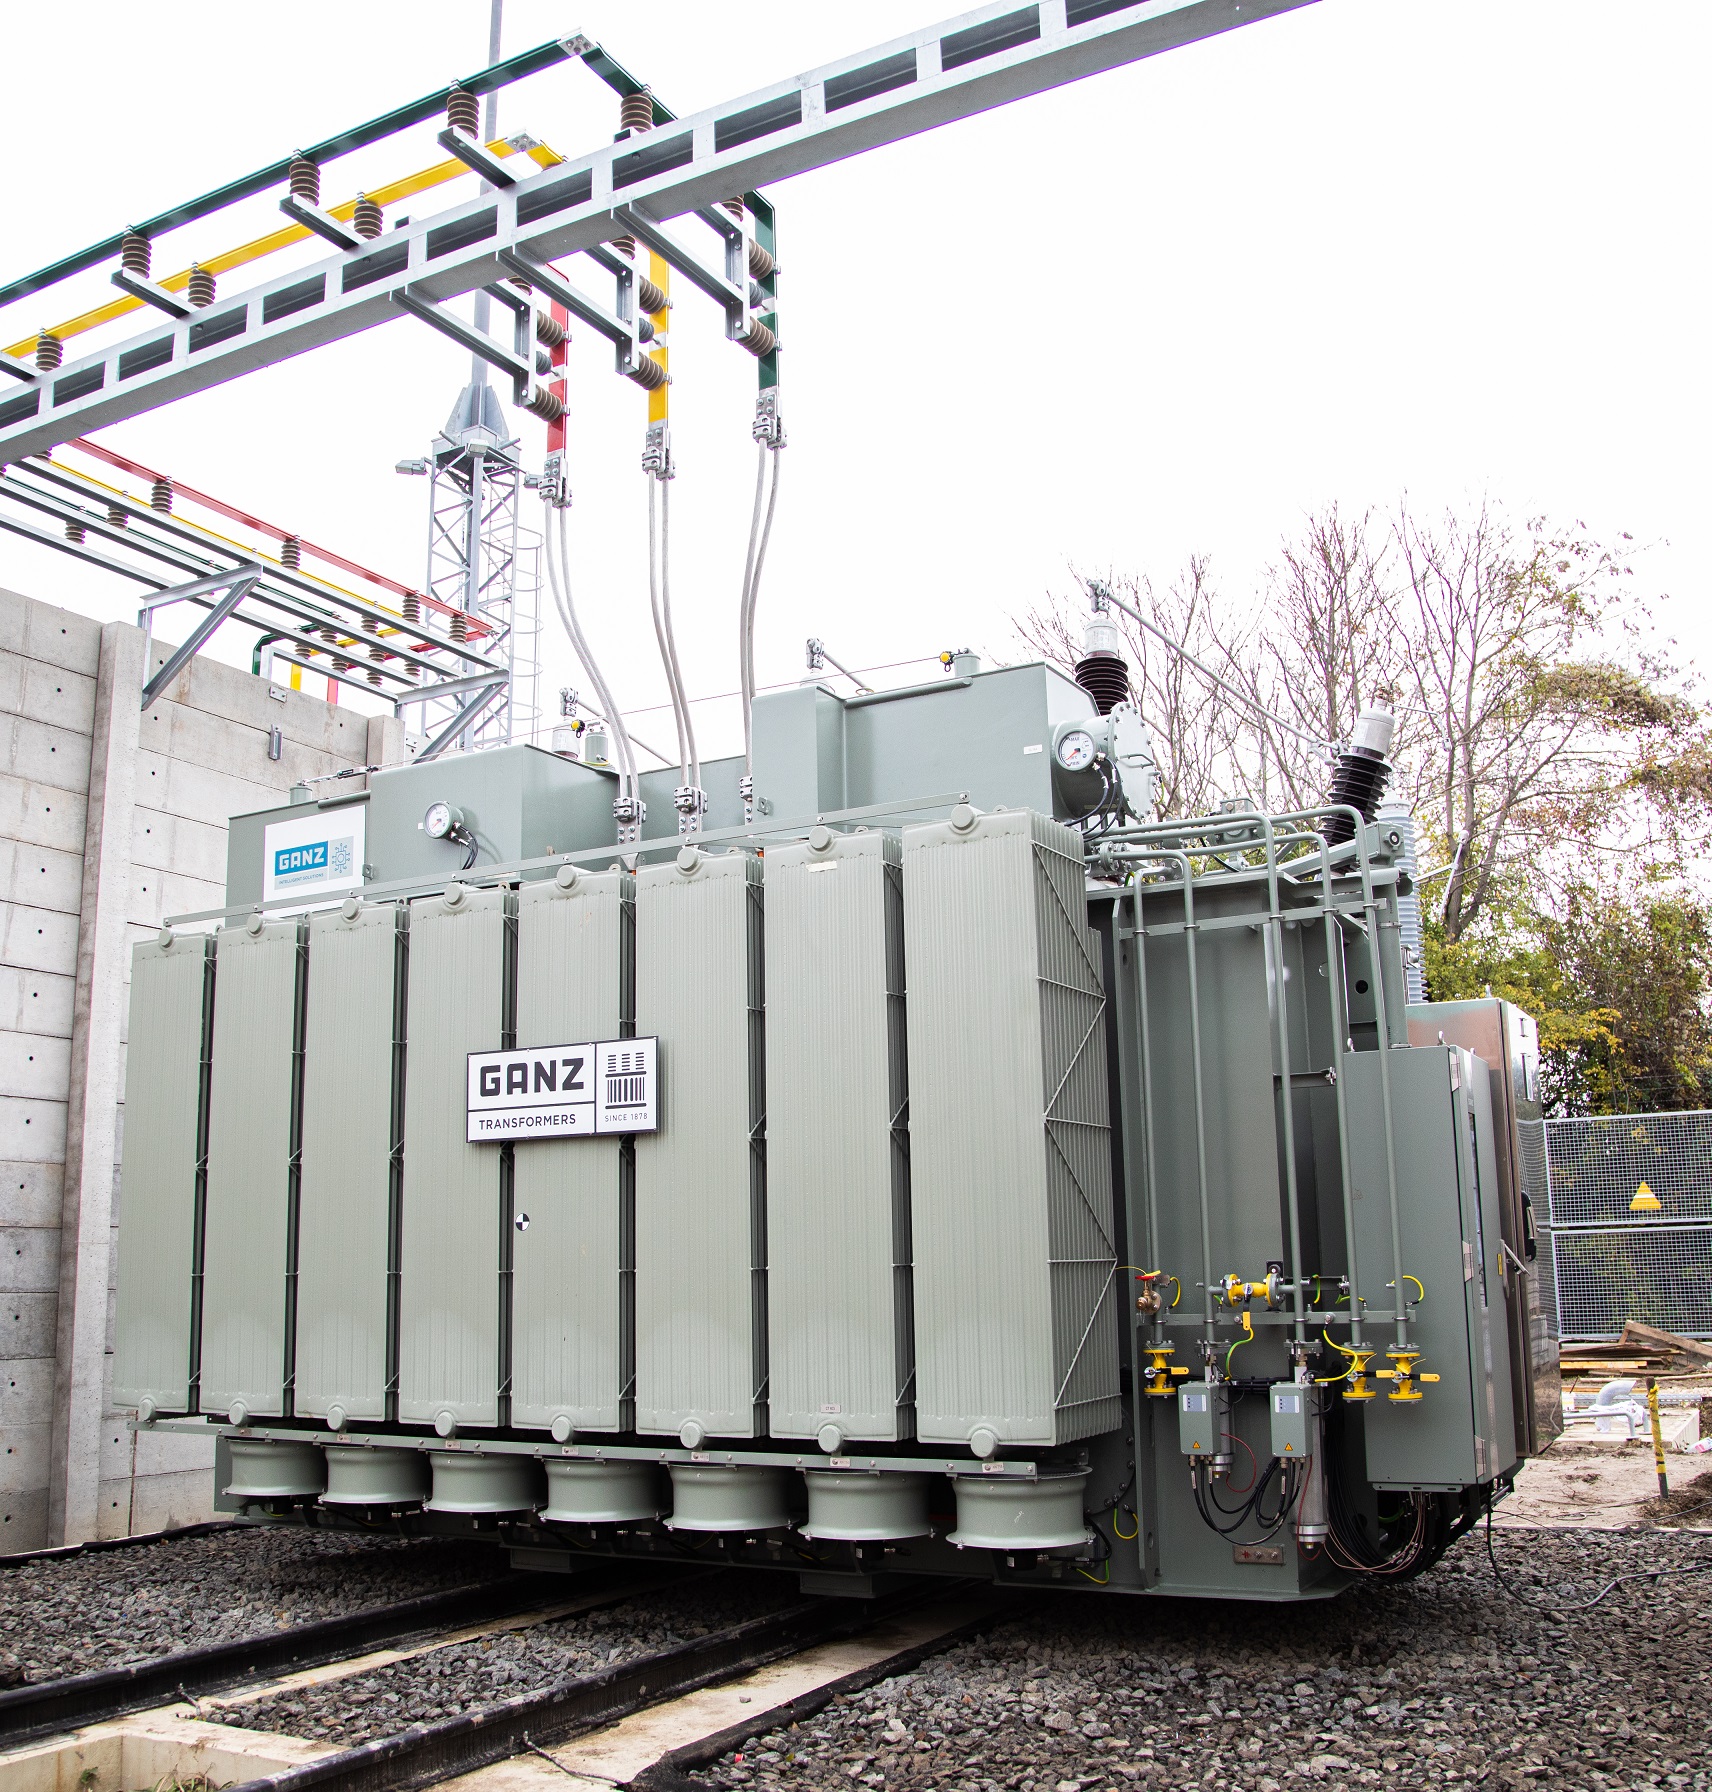 Ganz Delivers Hungary's 1st Transformer With a Digital Twin